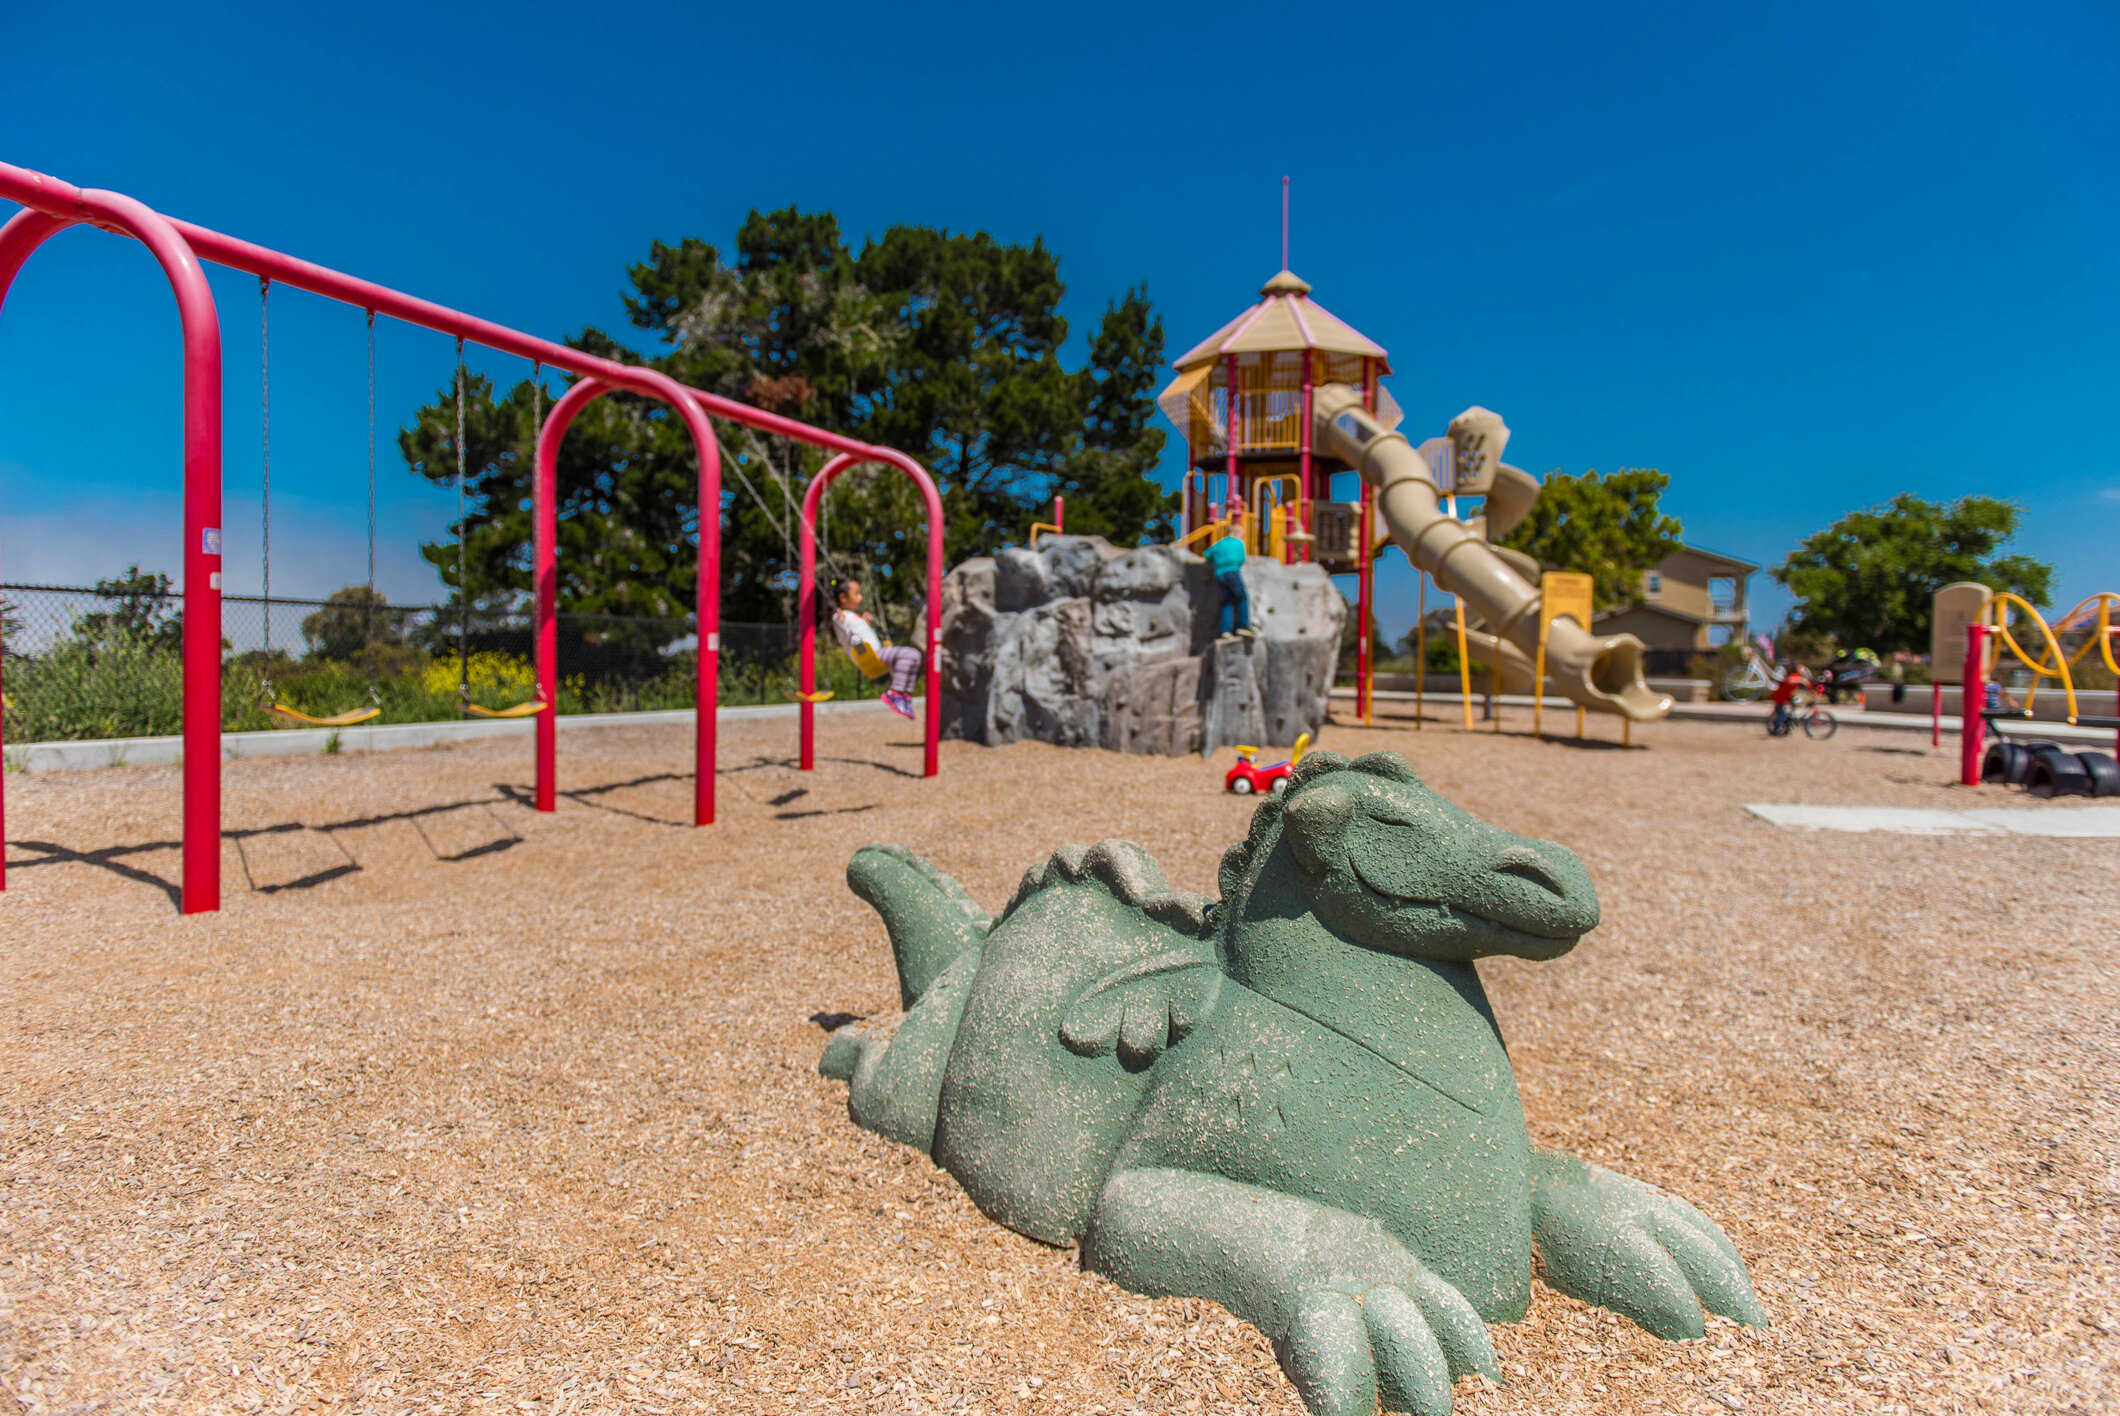 The Parks at Monterey offers over 30 family-friendly play structures including a Super Park!